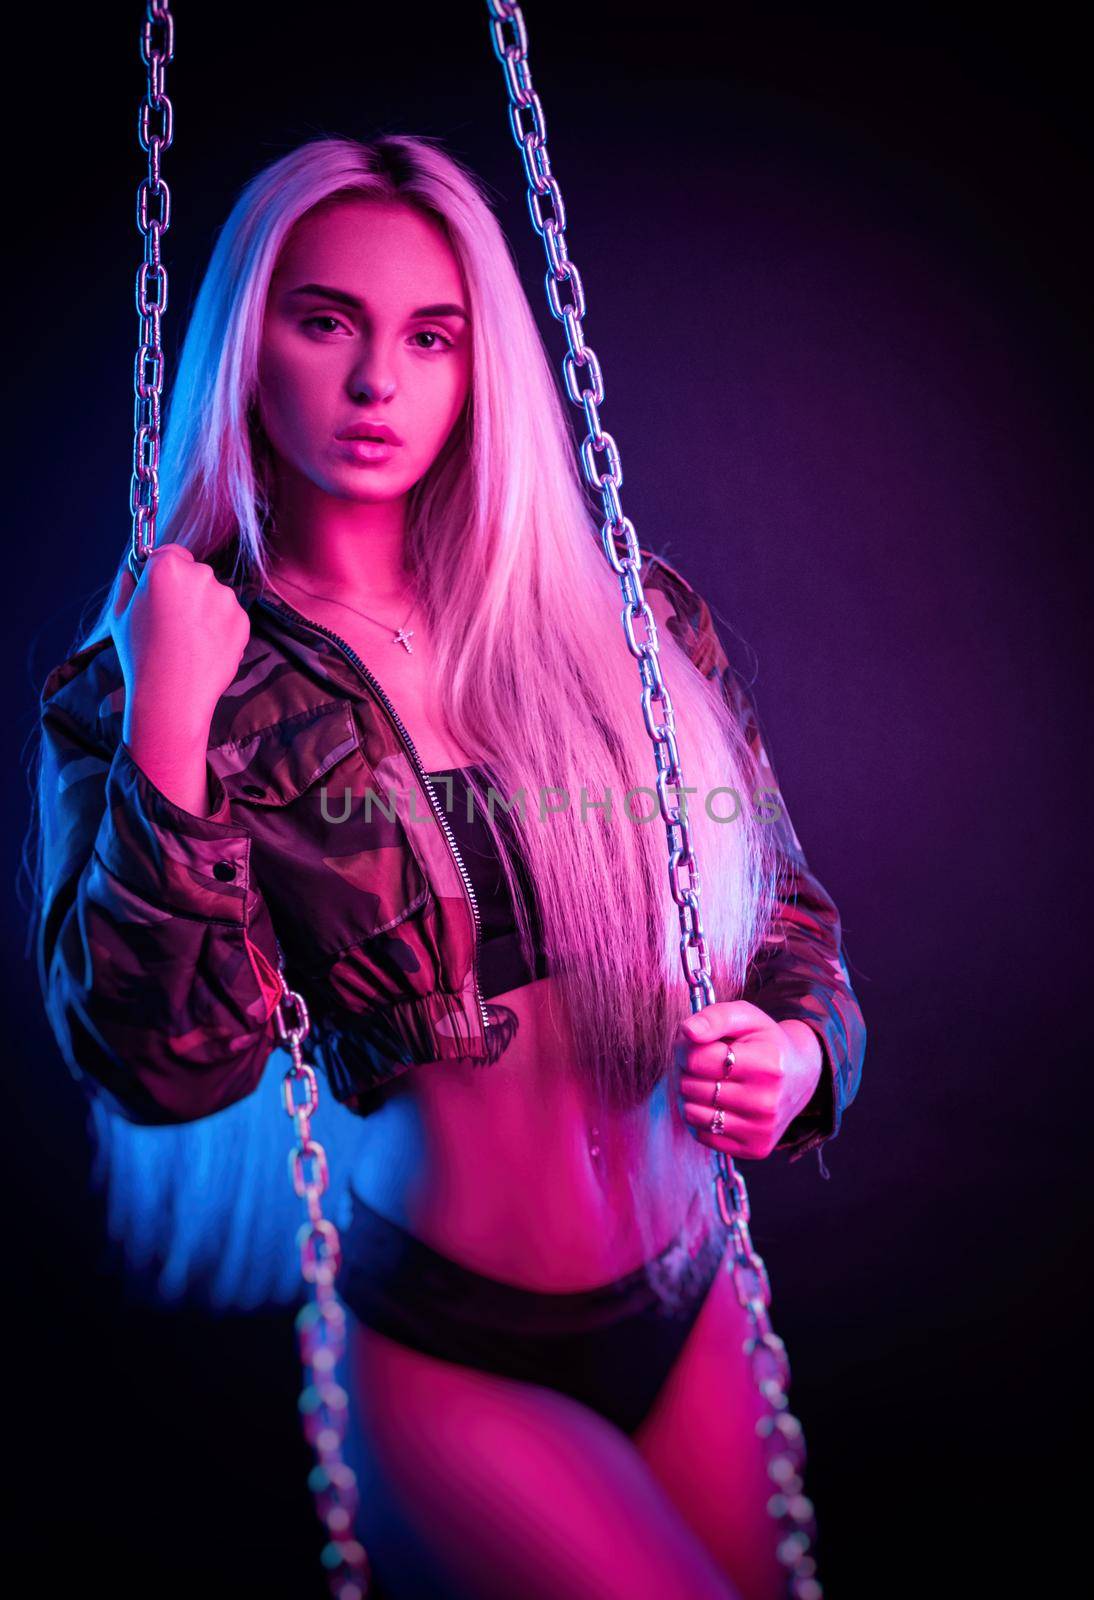 the beautiful stylish fashionable girl in bodysuit posing in photo Studio on dark background with chains in neon light